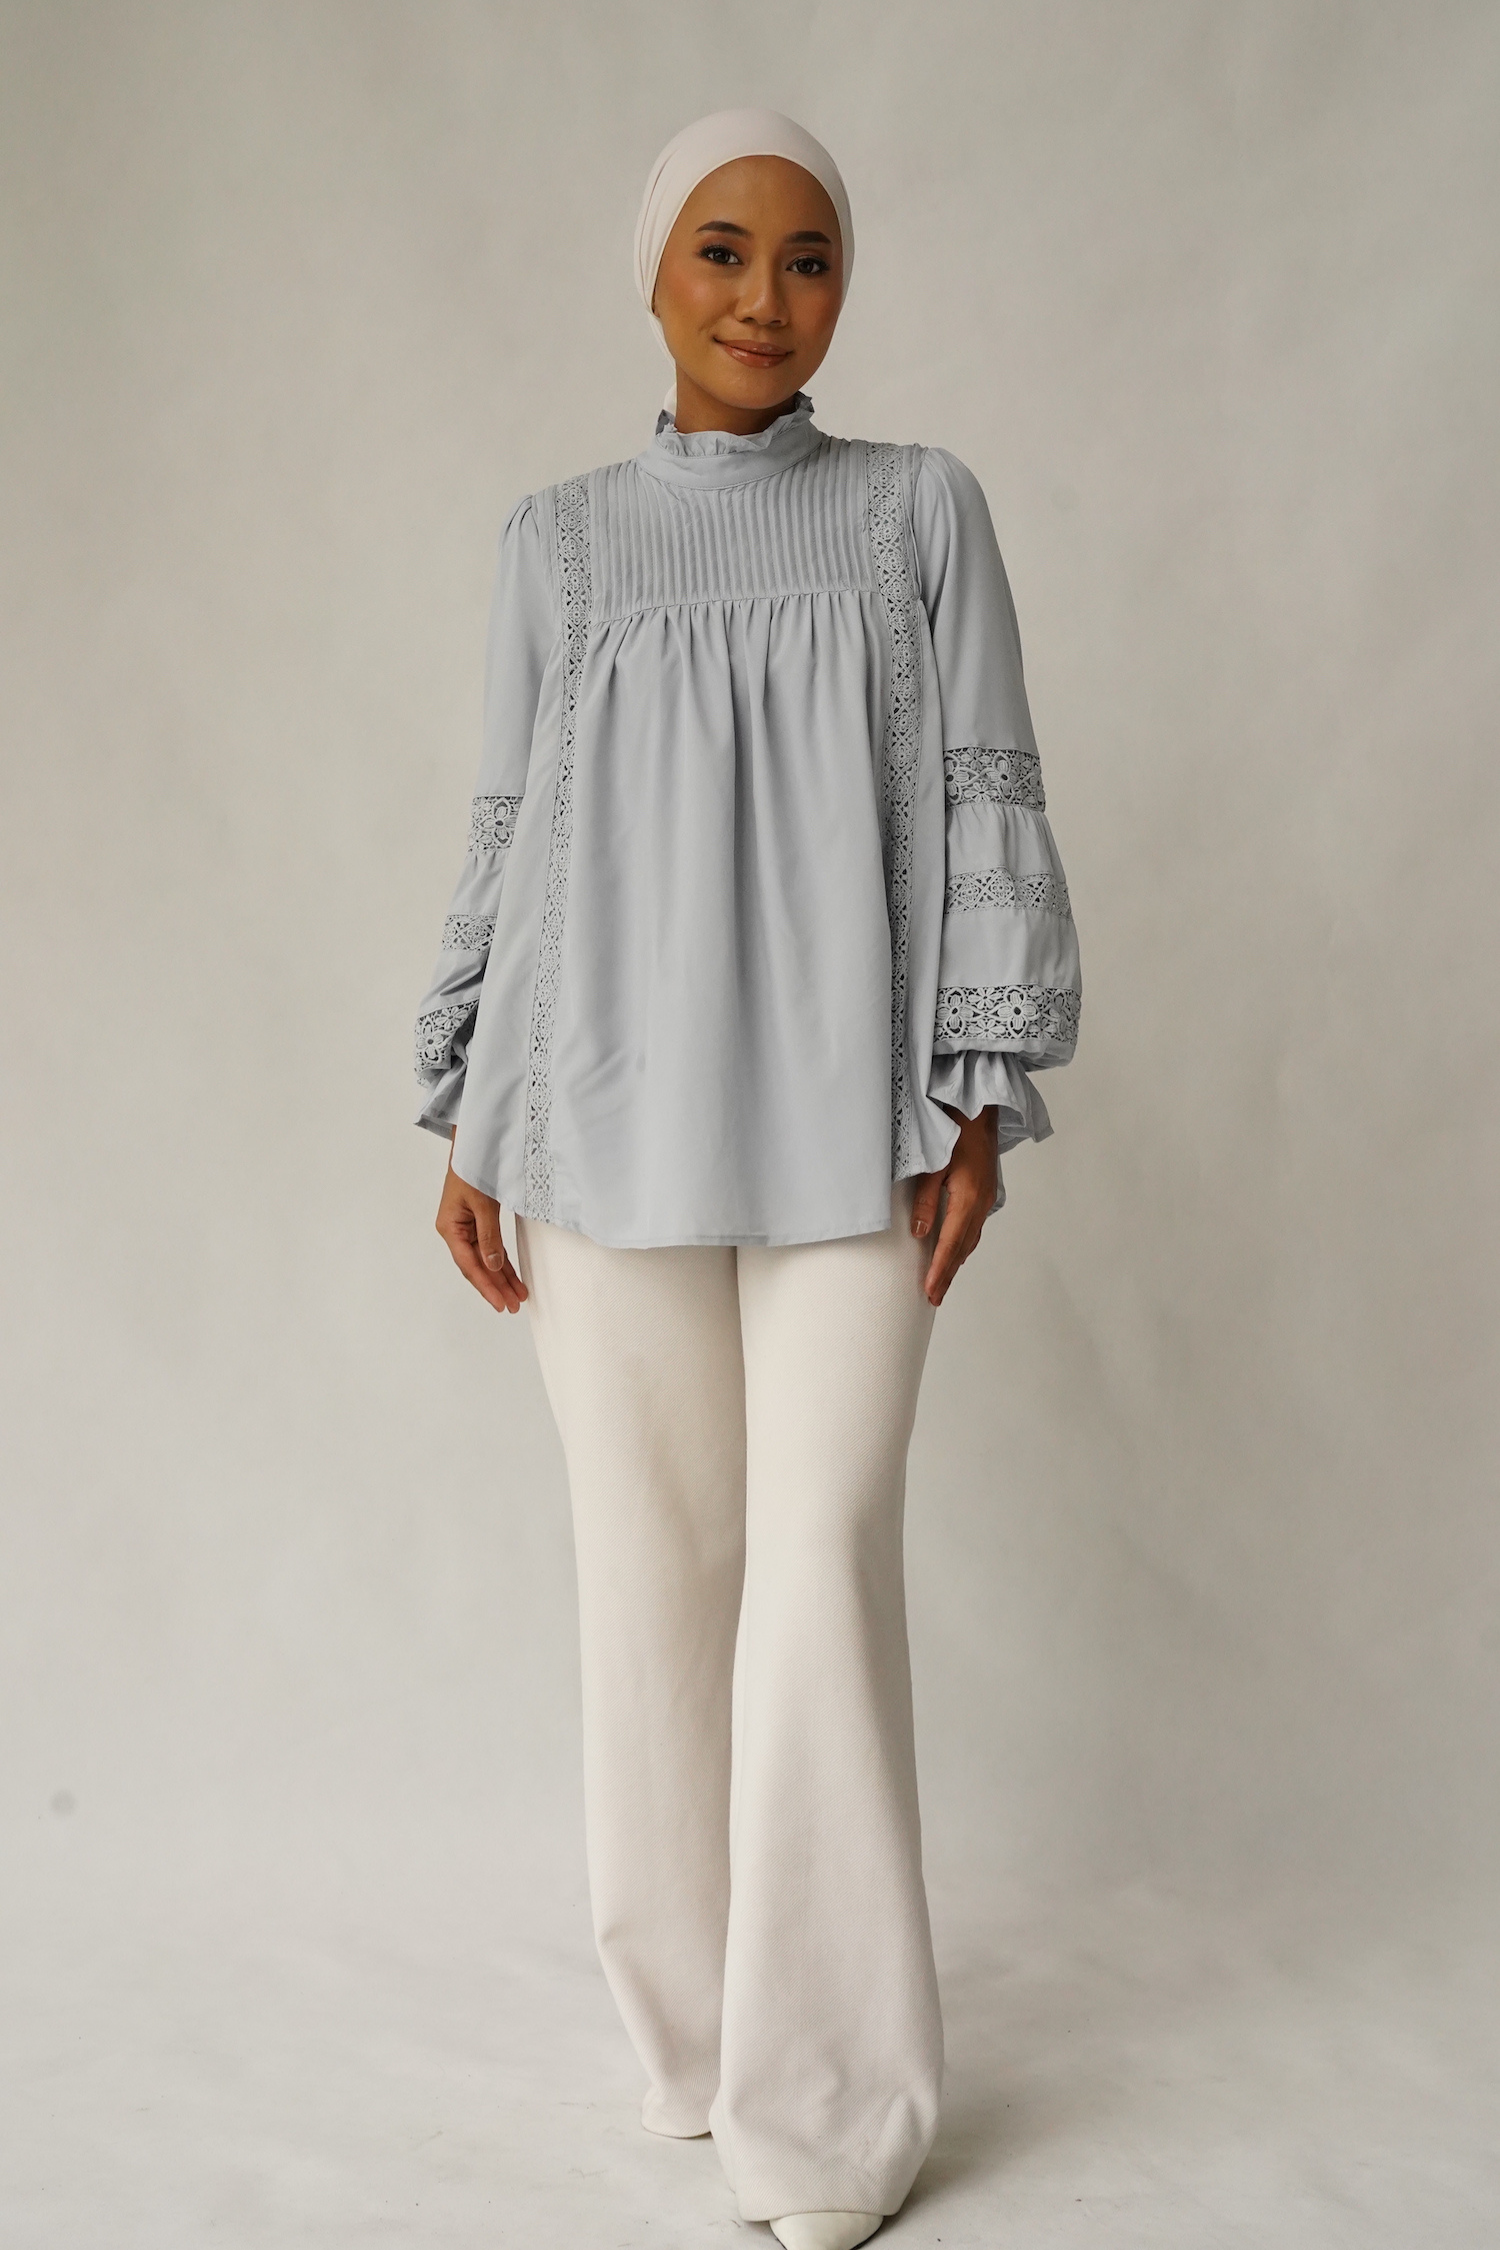 Paying homage to our Solange Kurung which made a debut this Eid - the Sonya Top is rendered in 100% soft, ultra lightweight matte polyester that features intricate pin-tucks at the bodice, floral inset lace detailing streaming down the bodice and at the puffed, bracelet-length sleeves. 